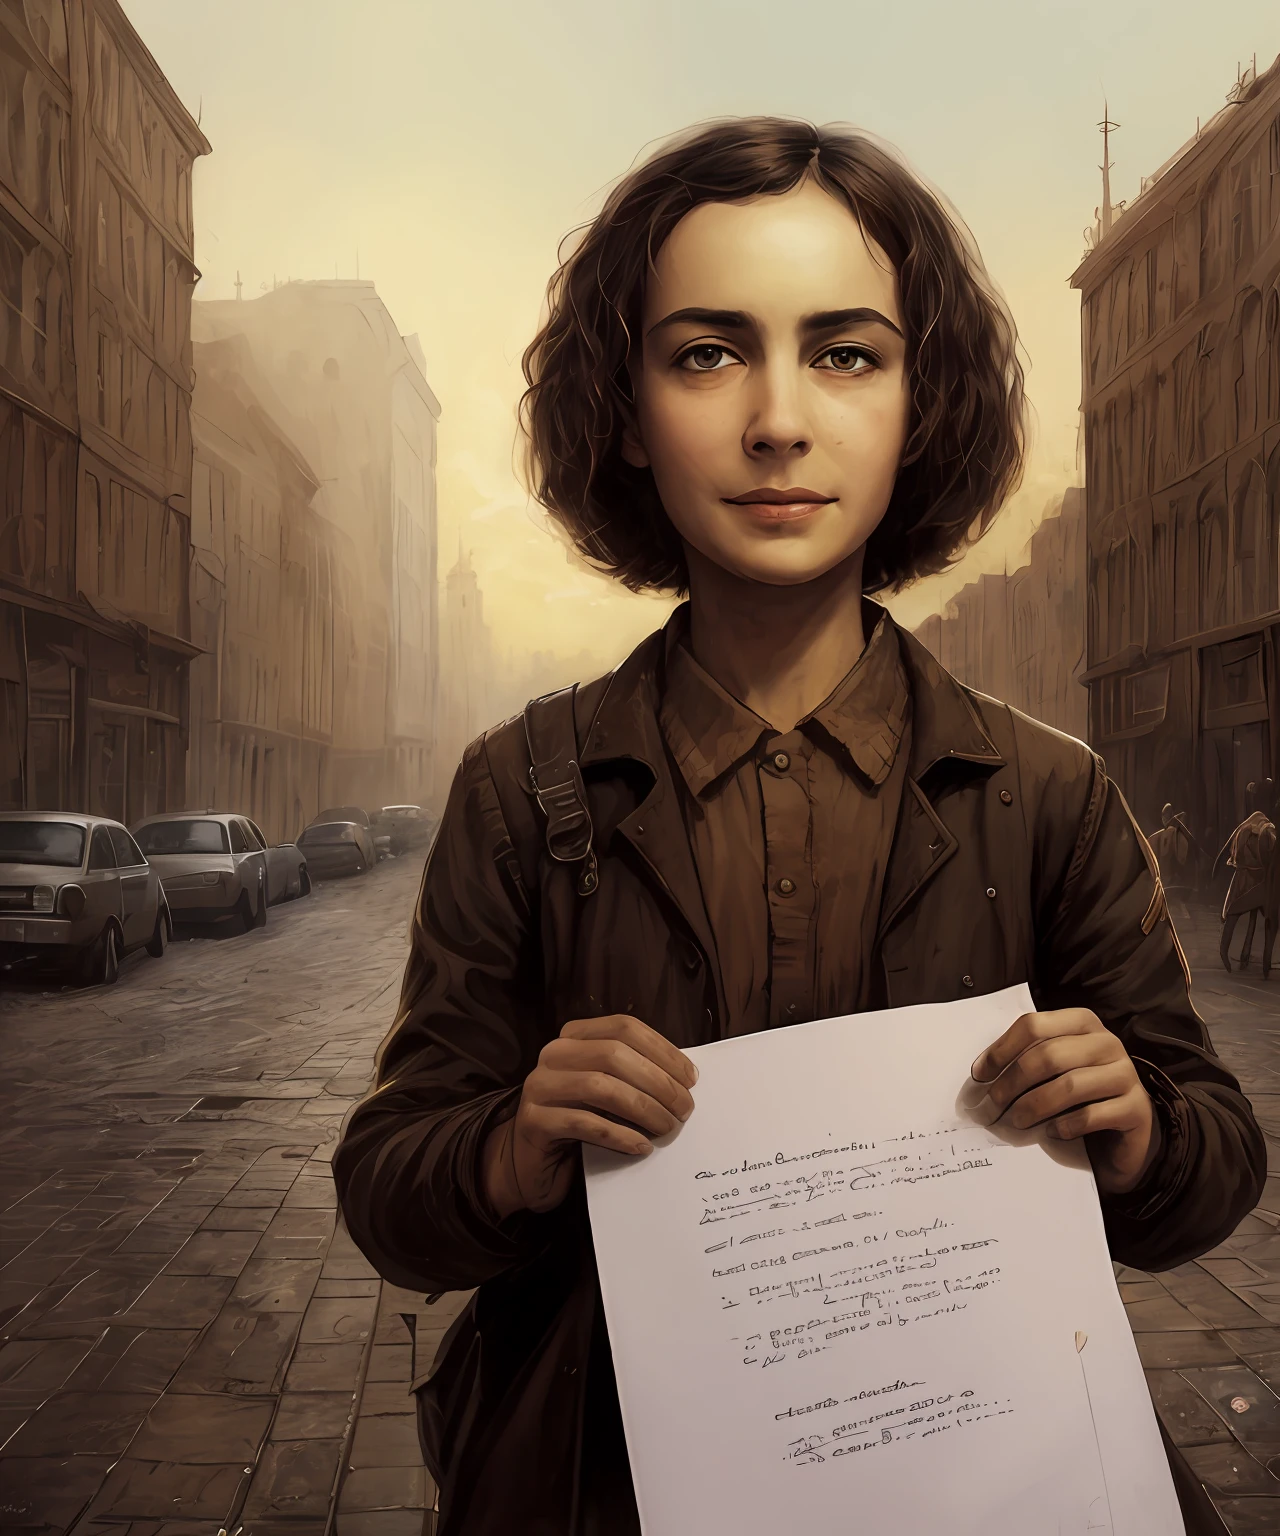 Anne Frank sad but hopeful looking straight ahead with sheets of white paper in her hands. Alejandro Burdisio art, Post - Apocalyptic vibration, Post Apocalypse, Apocalyptic Art, James Gurney and Andreas Rocha, inspired by Alejandro Burdisio, Detailed cover, Post-Apocalypse, Post - Apocalypse, Pino Daeni and Dan Mumford, Elysium Artwork Album --auto